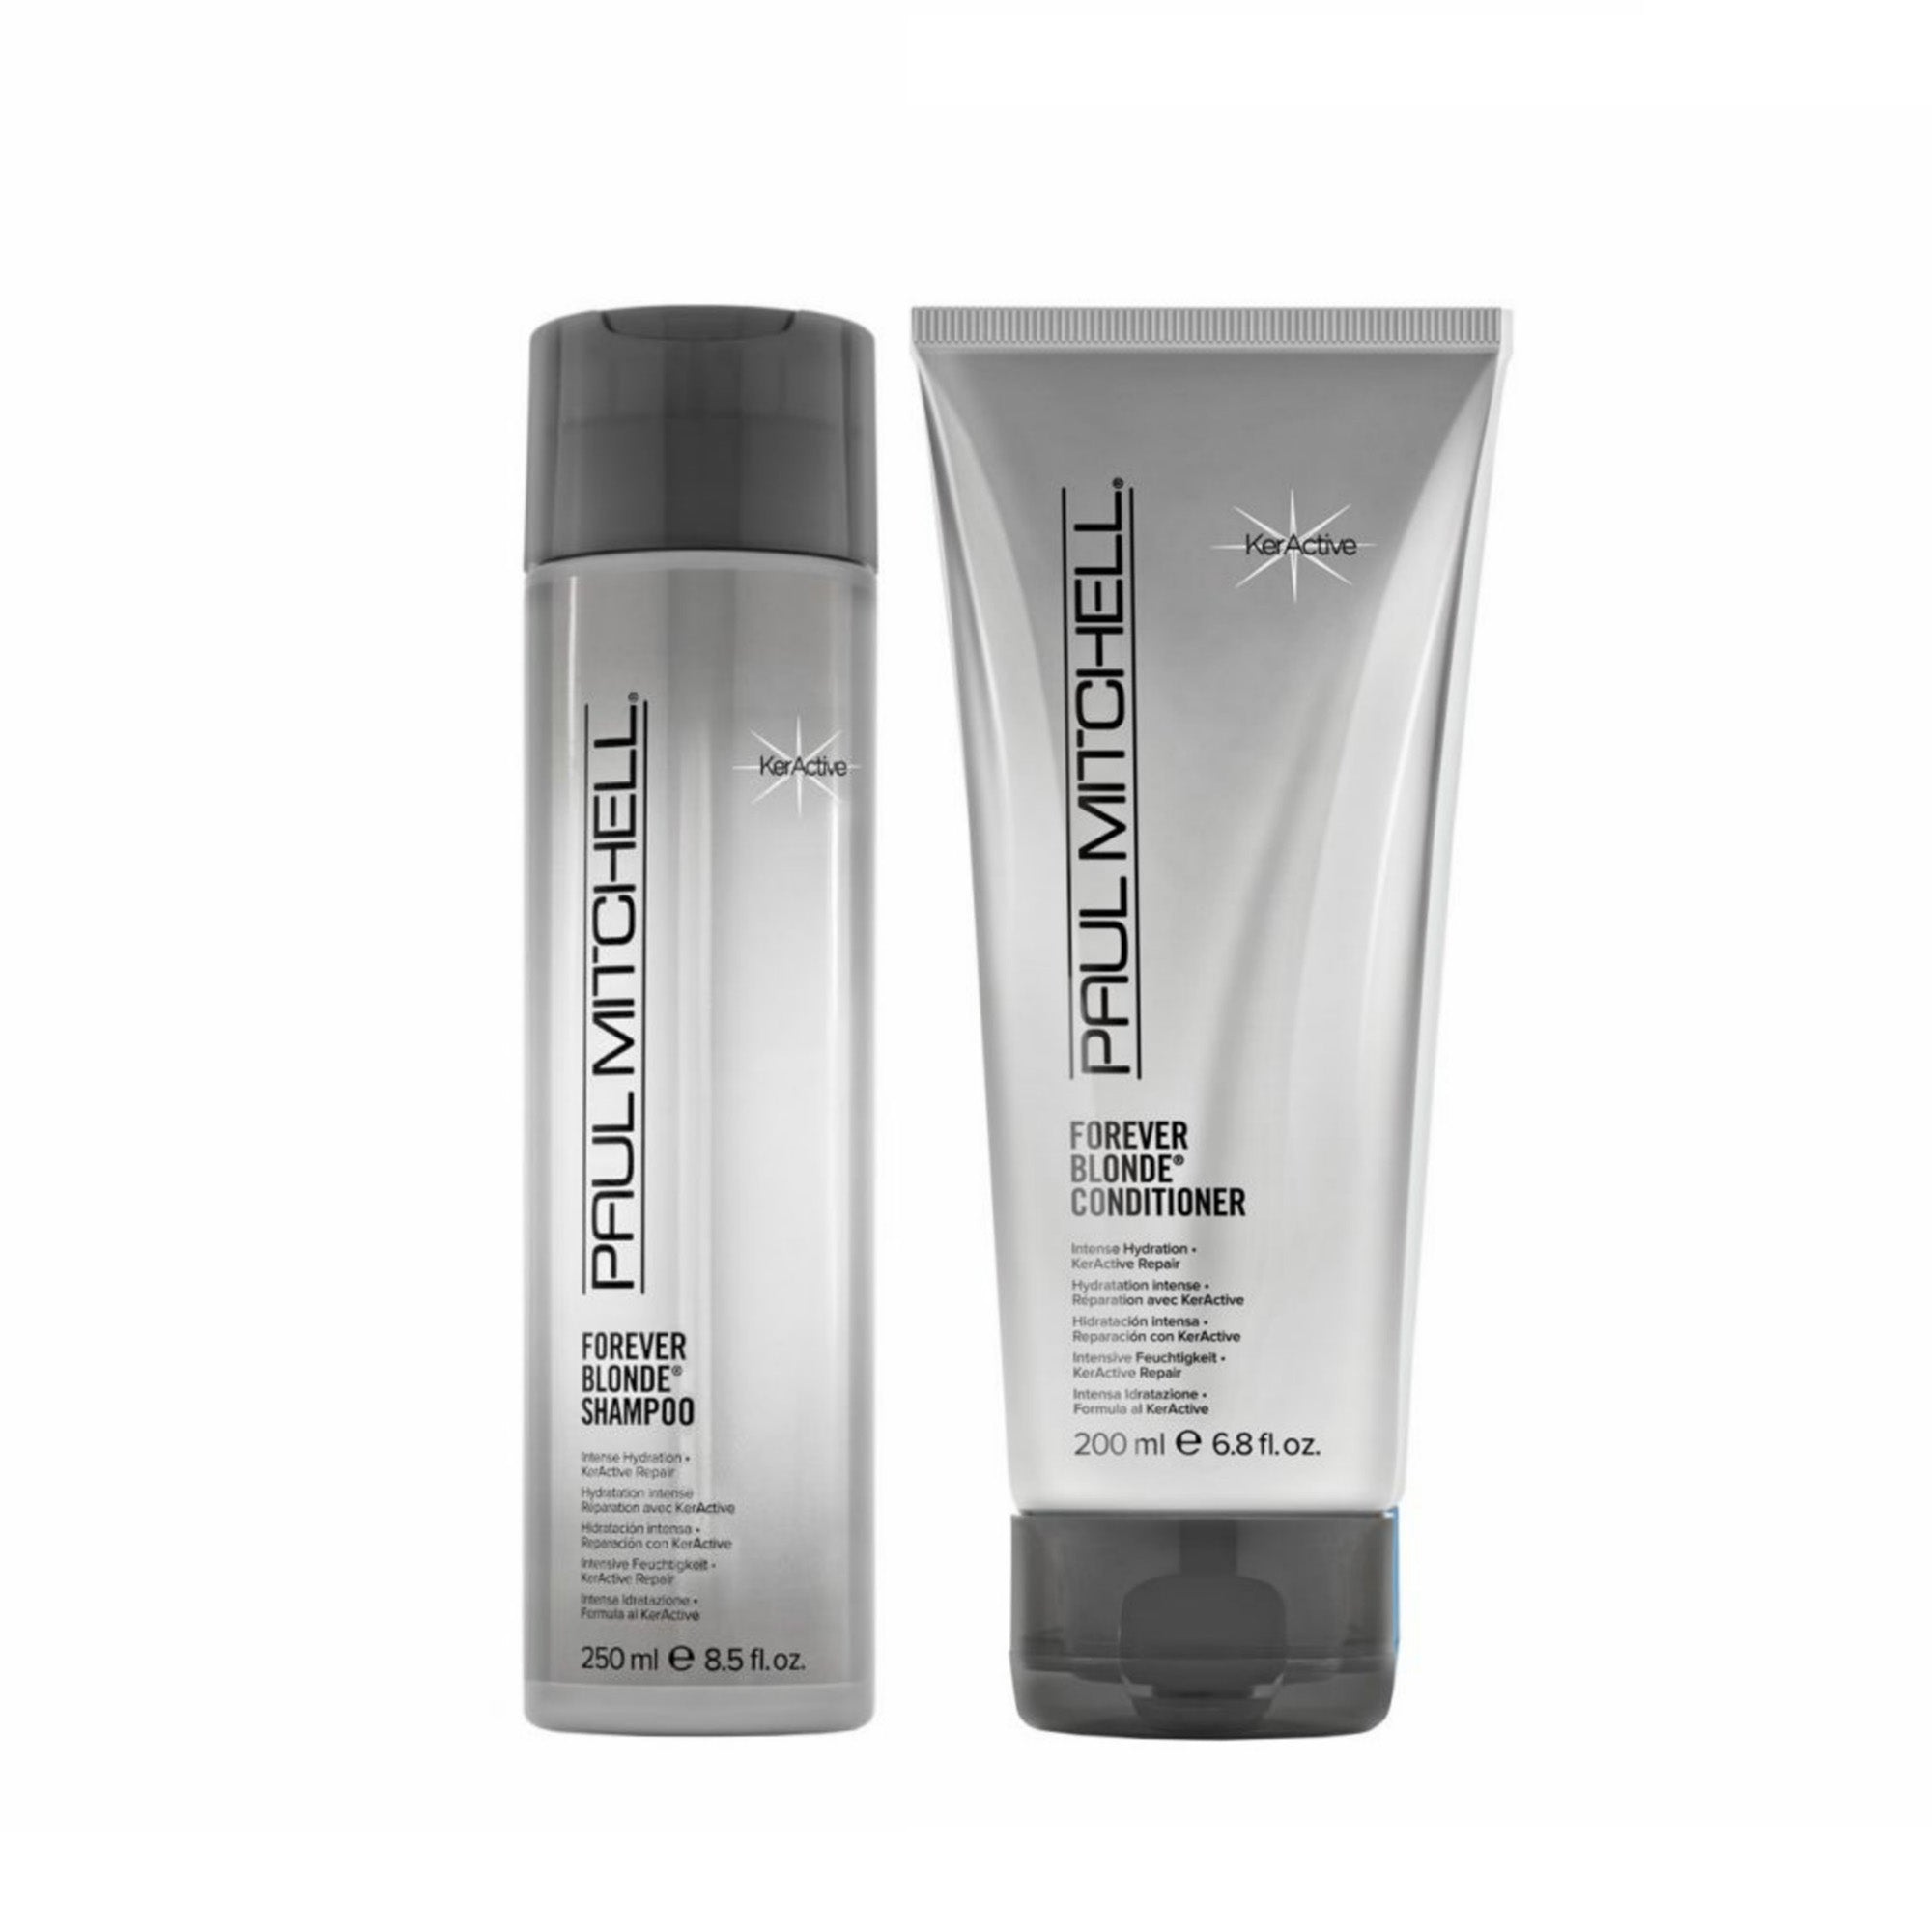 Paul Mitchell Forever Blonde Hair Shampoo 8.5 fl. oz. / 250ml & Conditioner 6.8 fl. oz. / 200ml - Paul Mitchell Hair Products for Smooth Repair